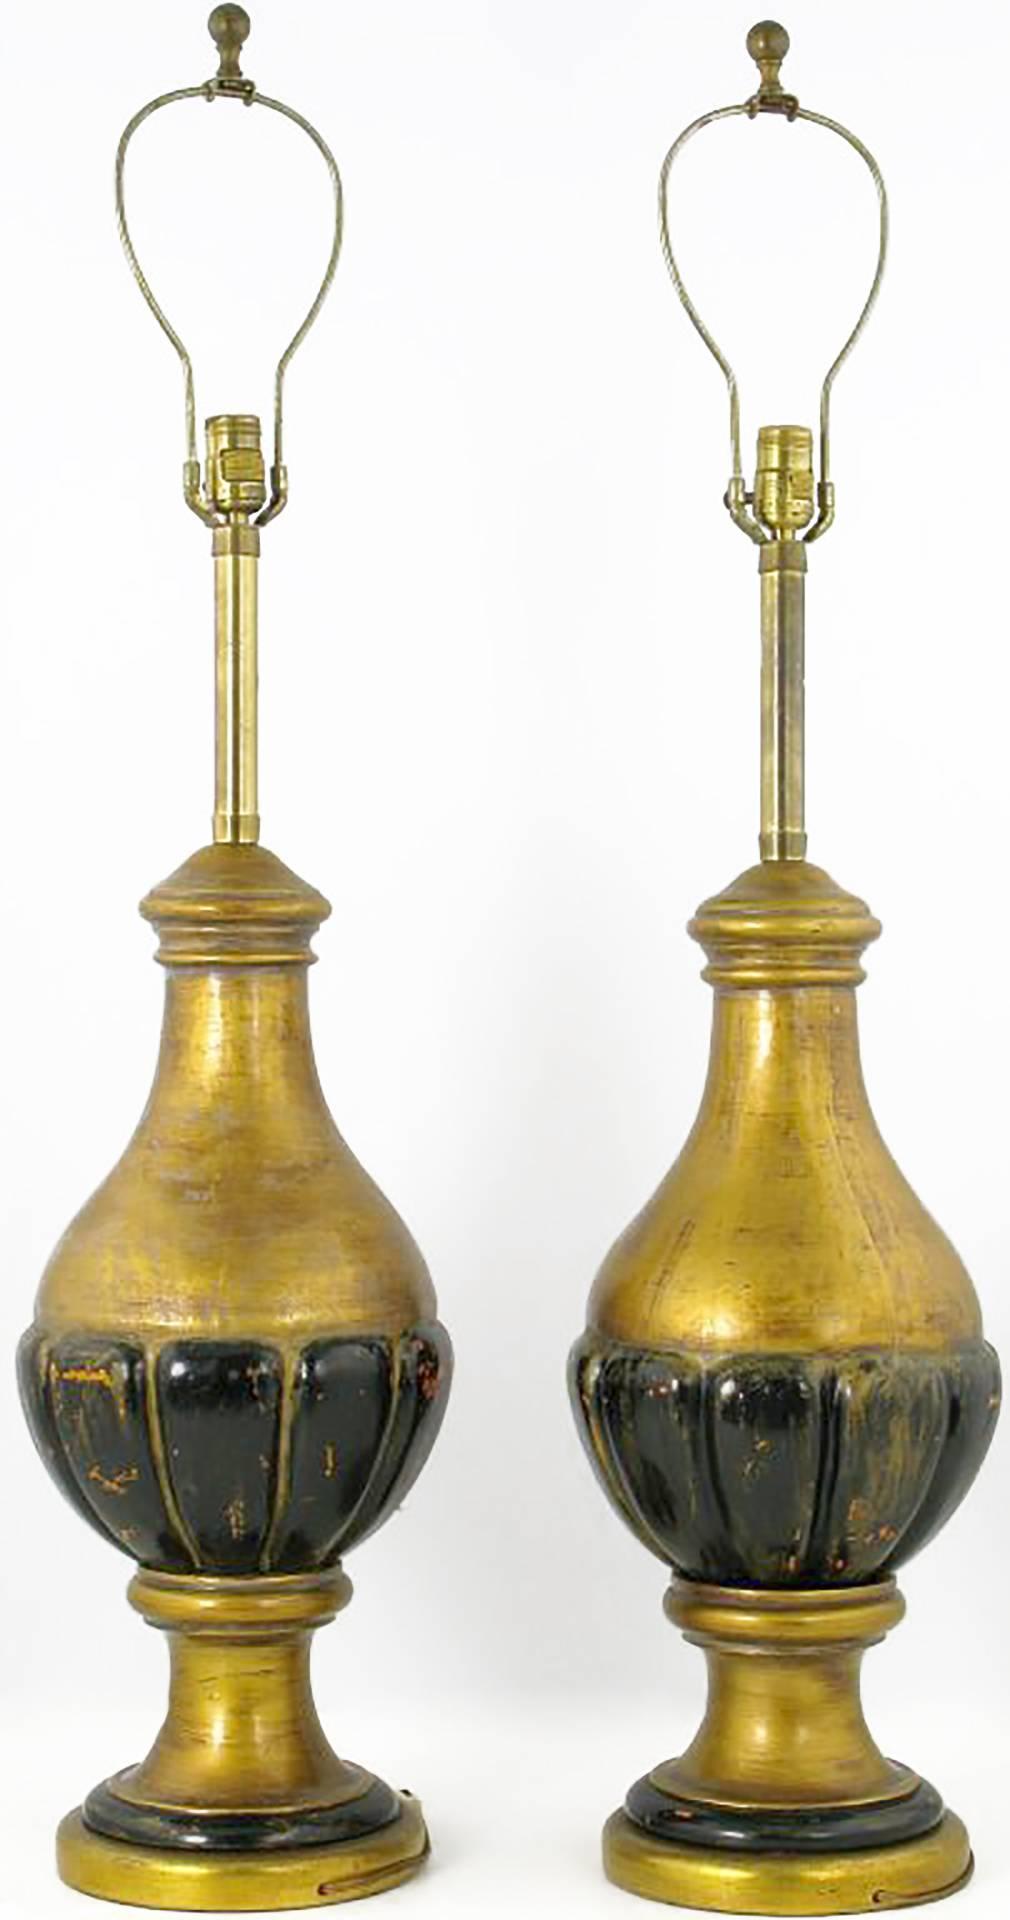 Pair of substantial table lamps by Marbro. Wonderfully distressed from natural use, the gilt and painted wood gourd-form bodies have a patina that only age can bring. Sold sans shades.